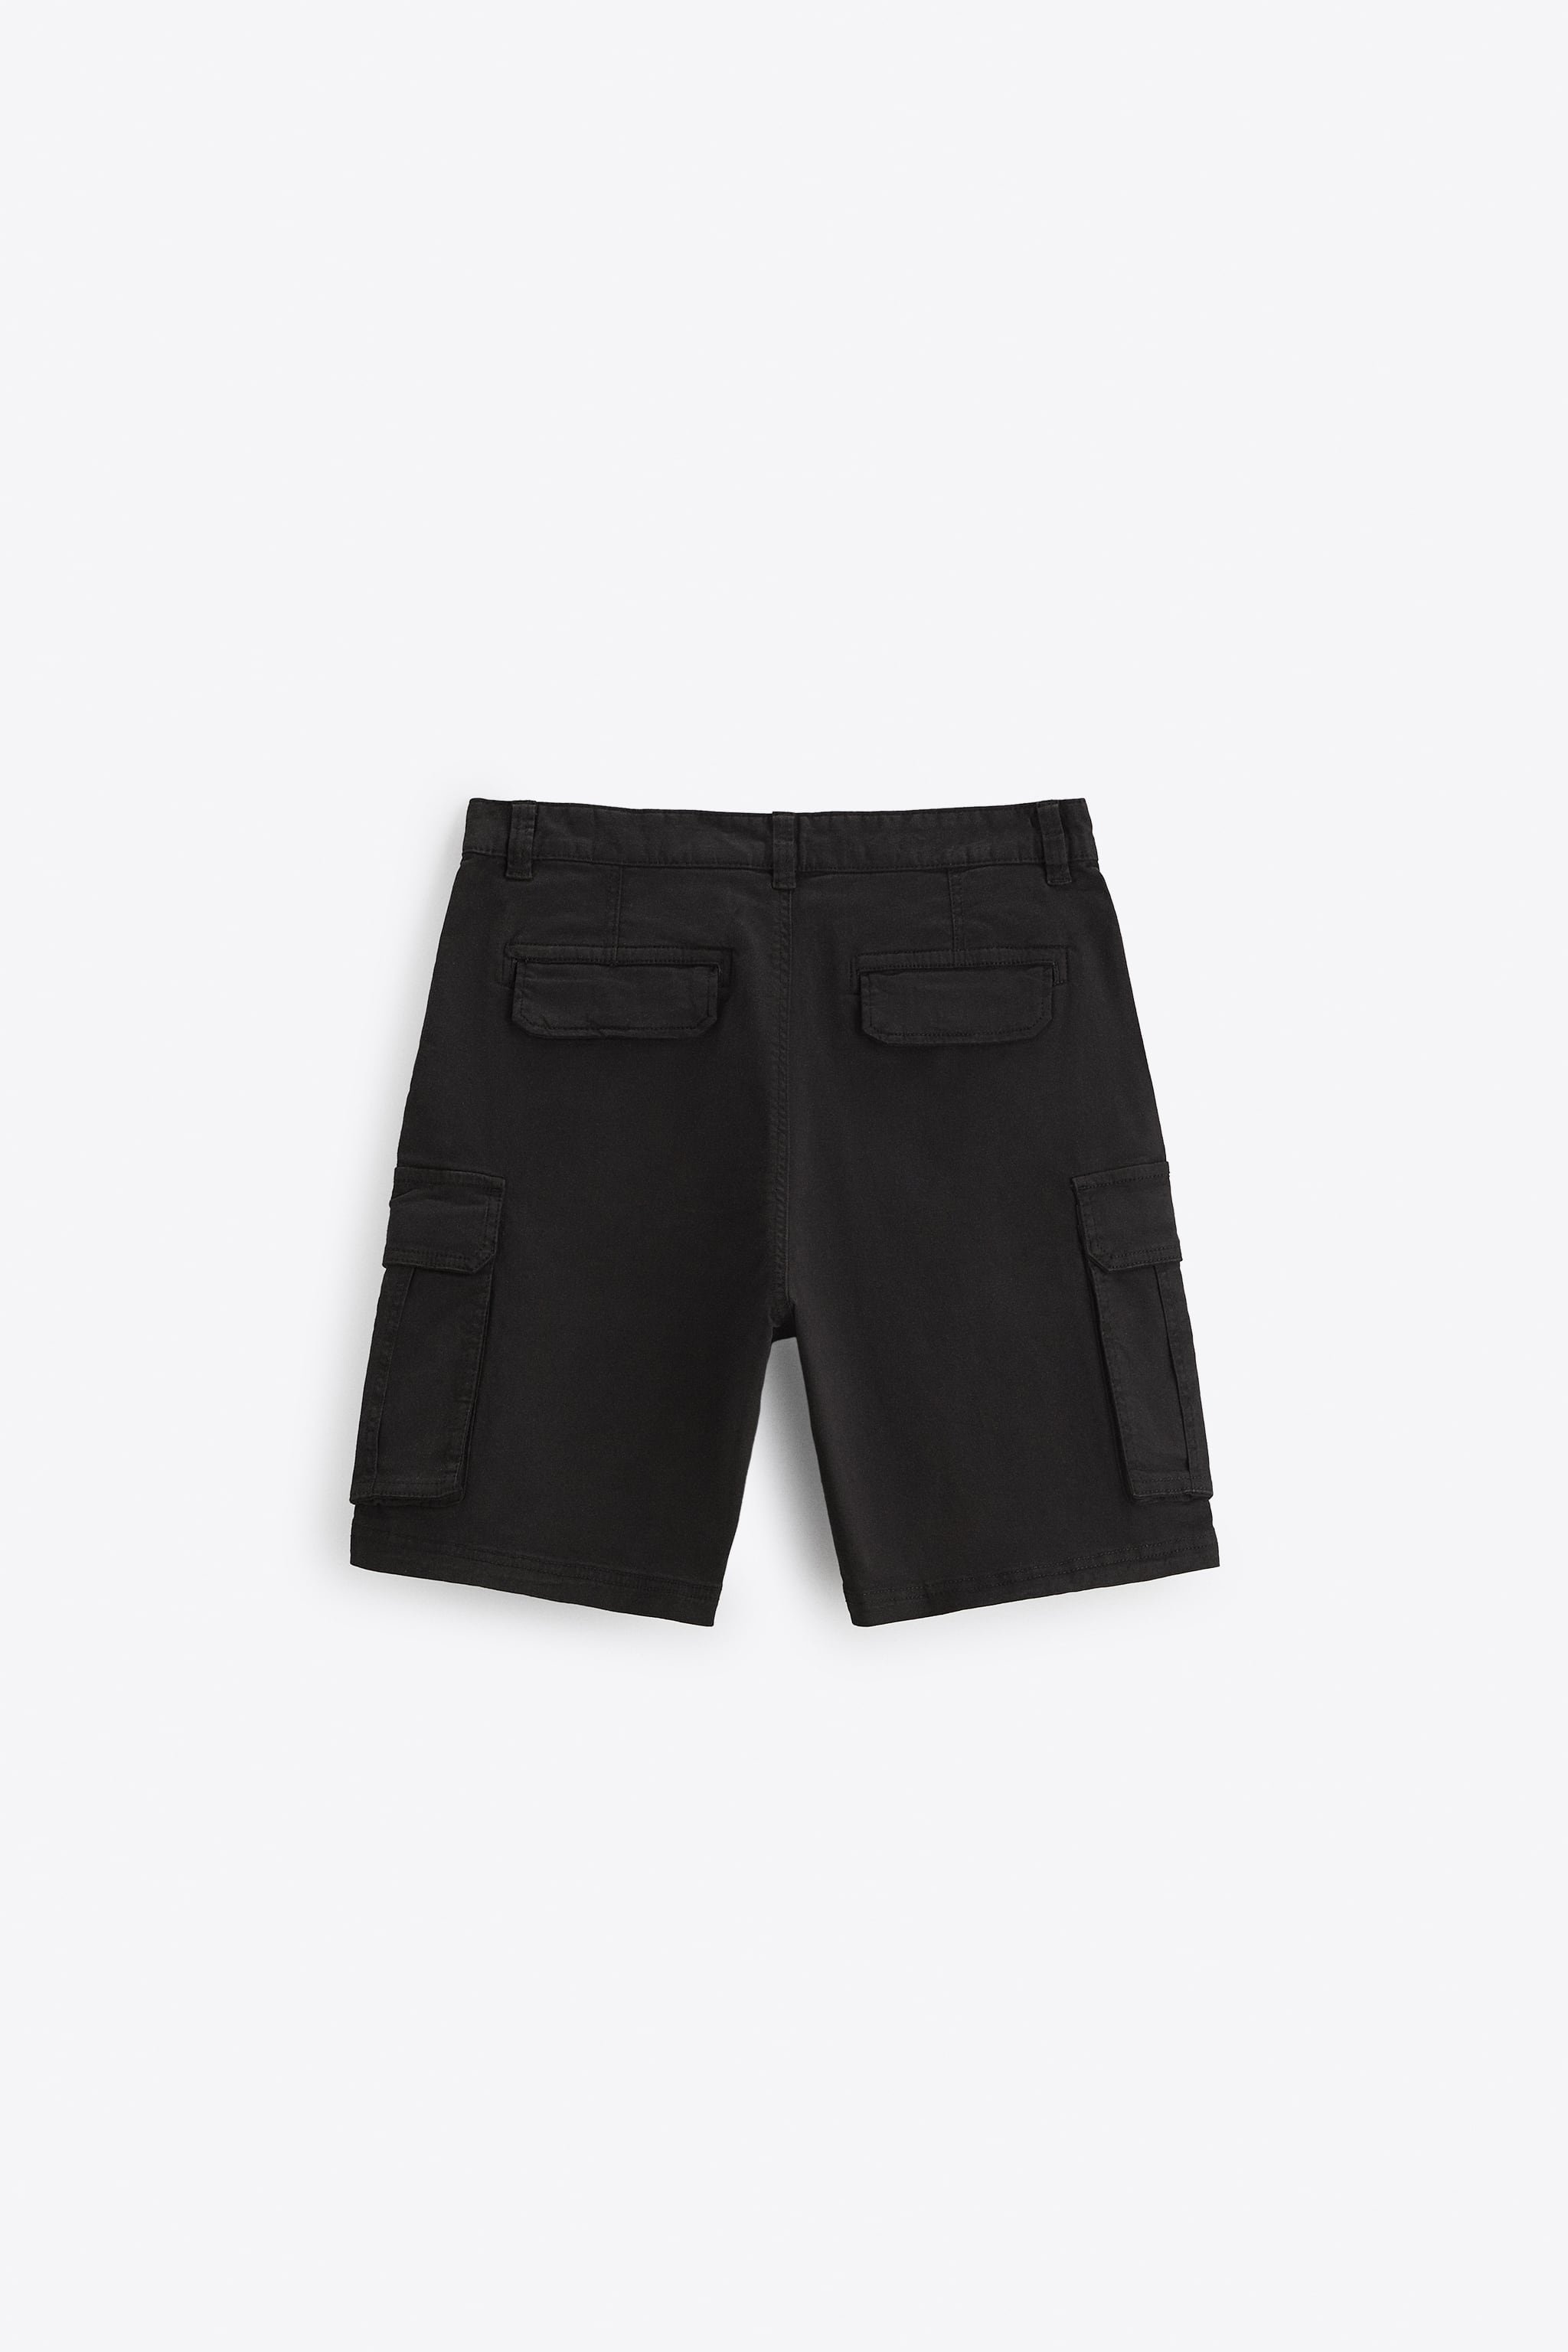 Elastic waistband shorts. Front pockets and back Flap pockets. patch at legs. zip button closure.